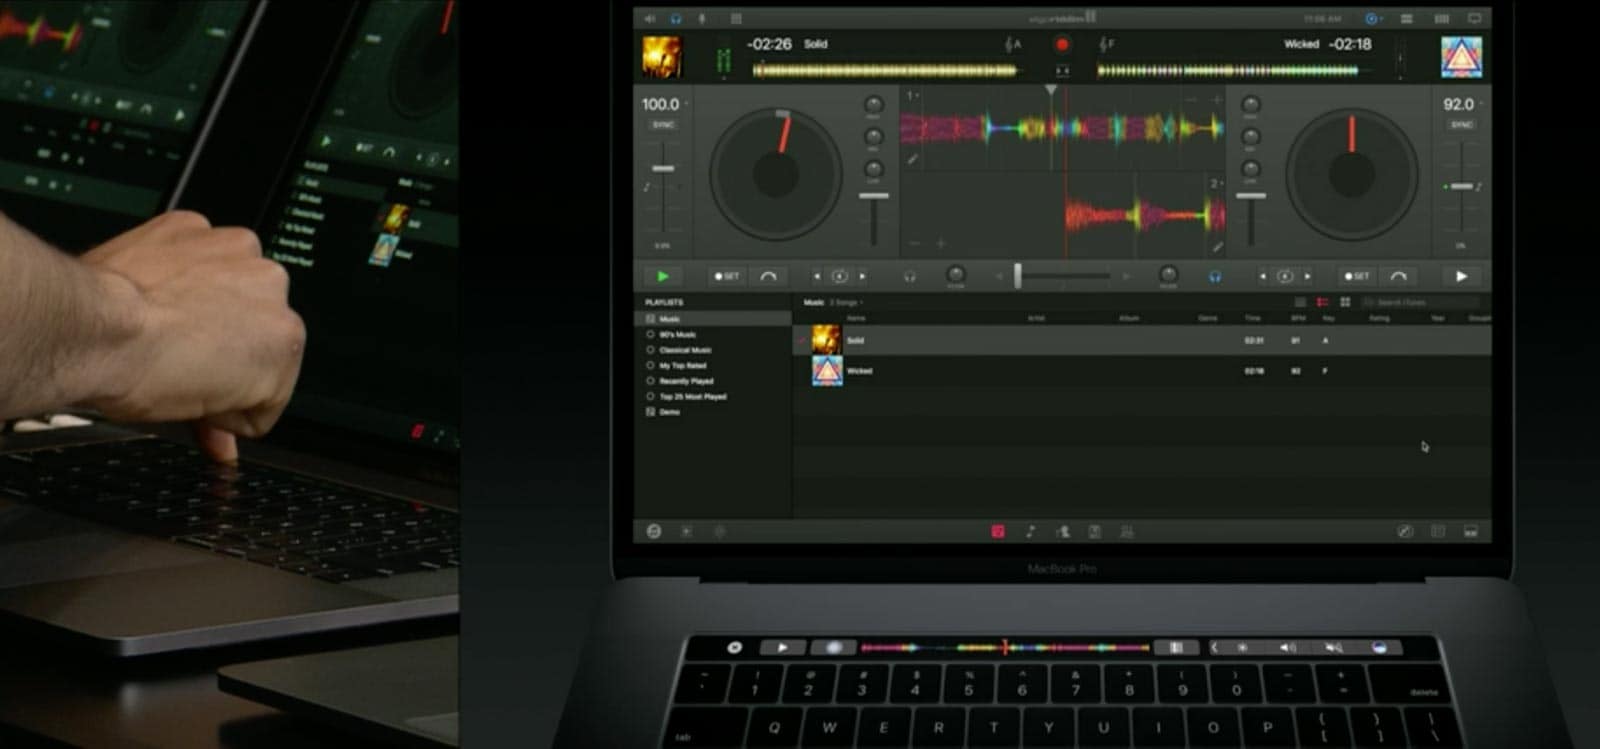 MacBook Pro with Touch Bar DJ demo at 